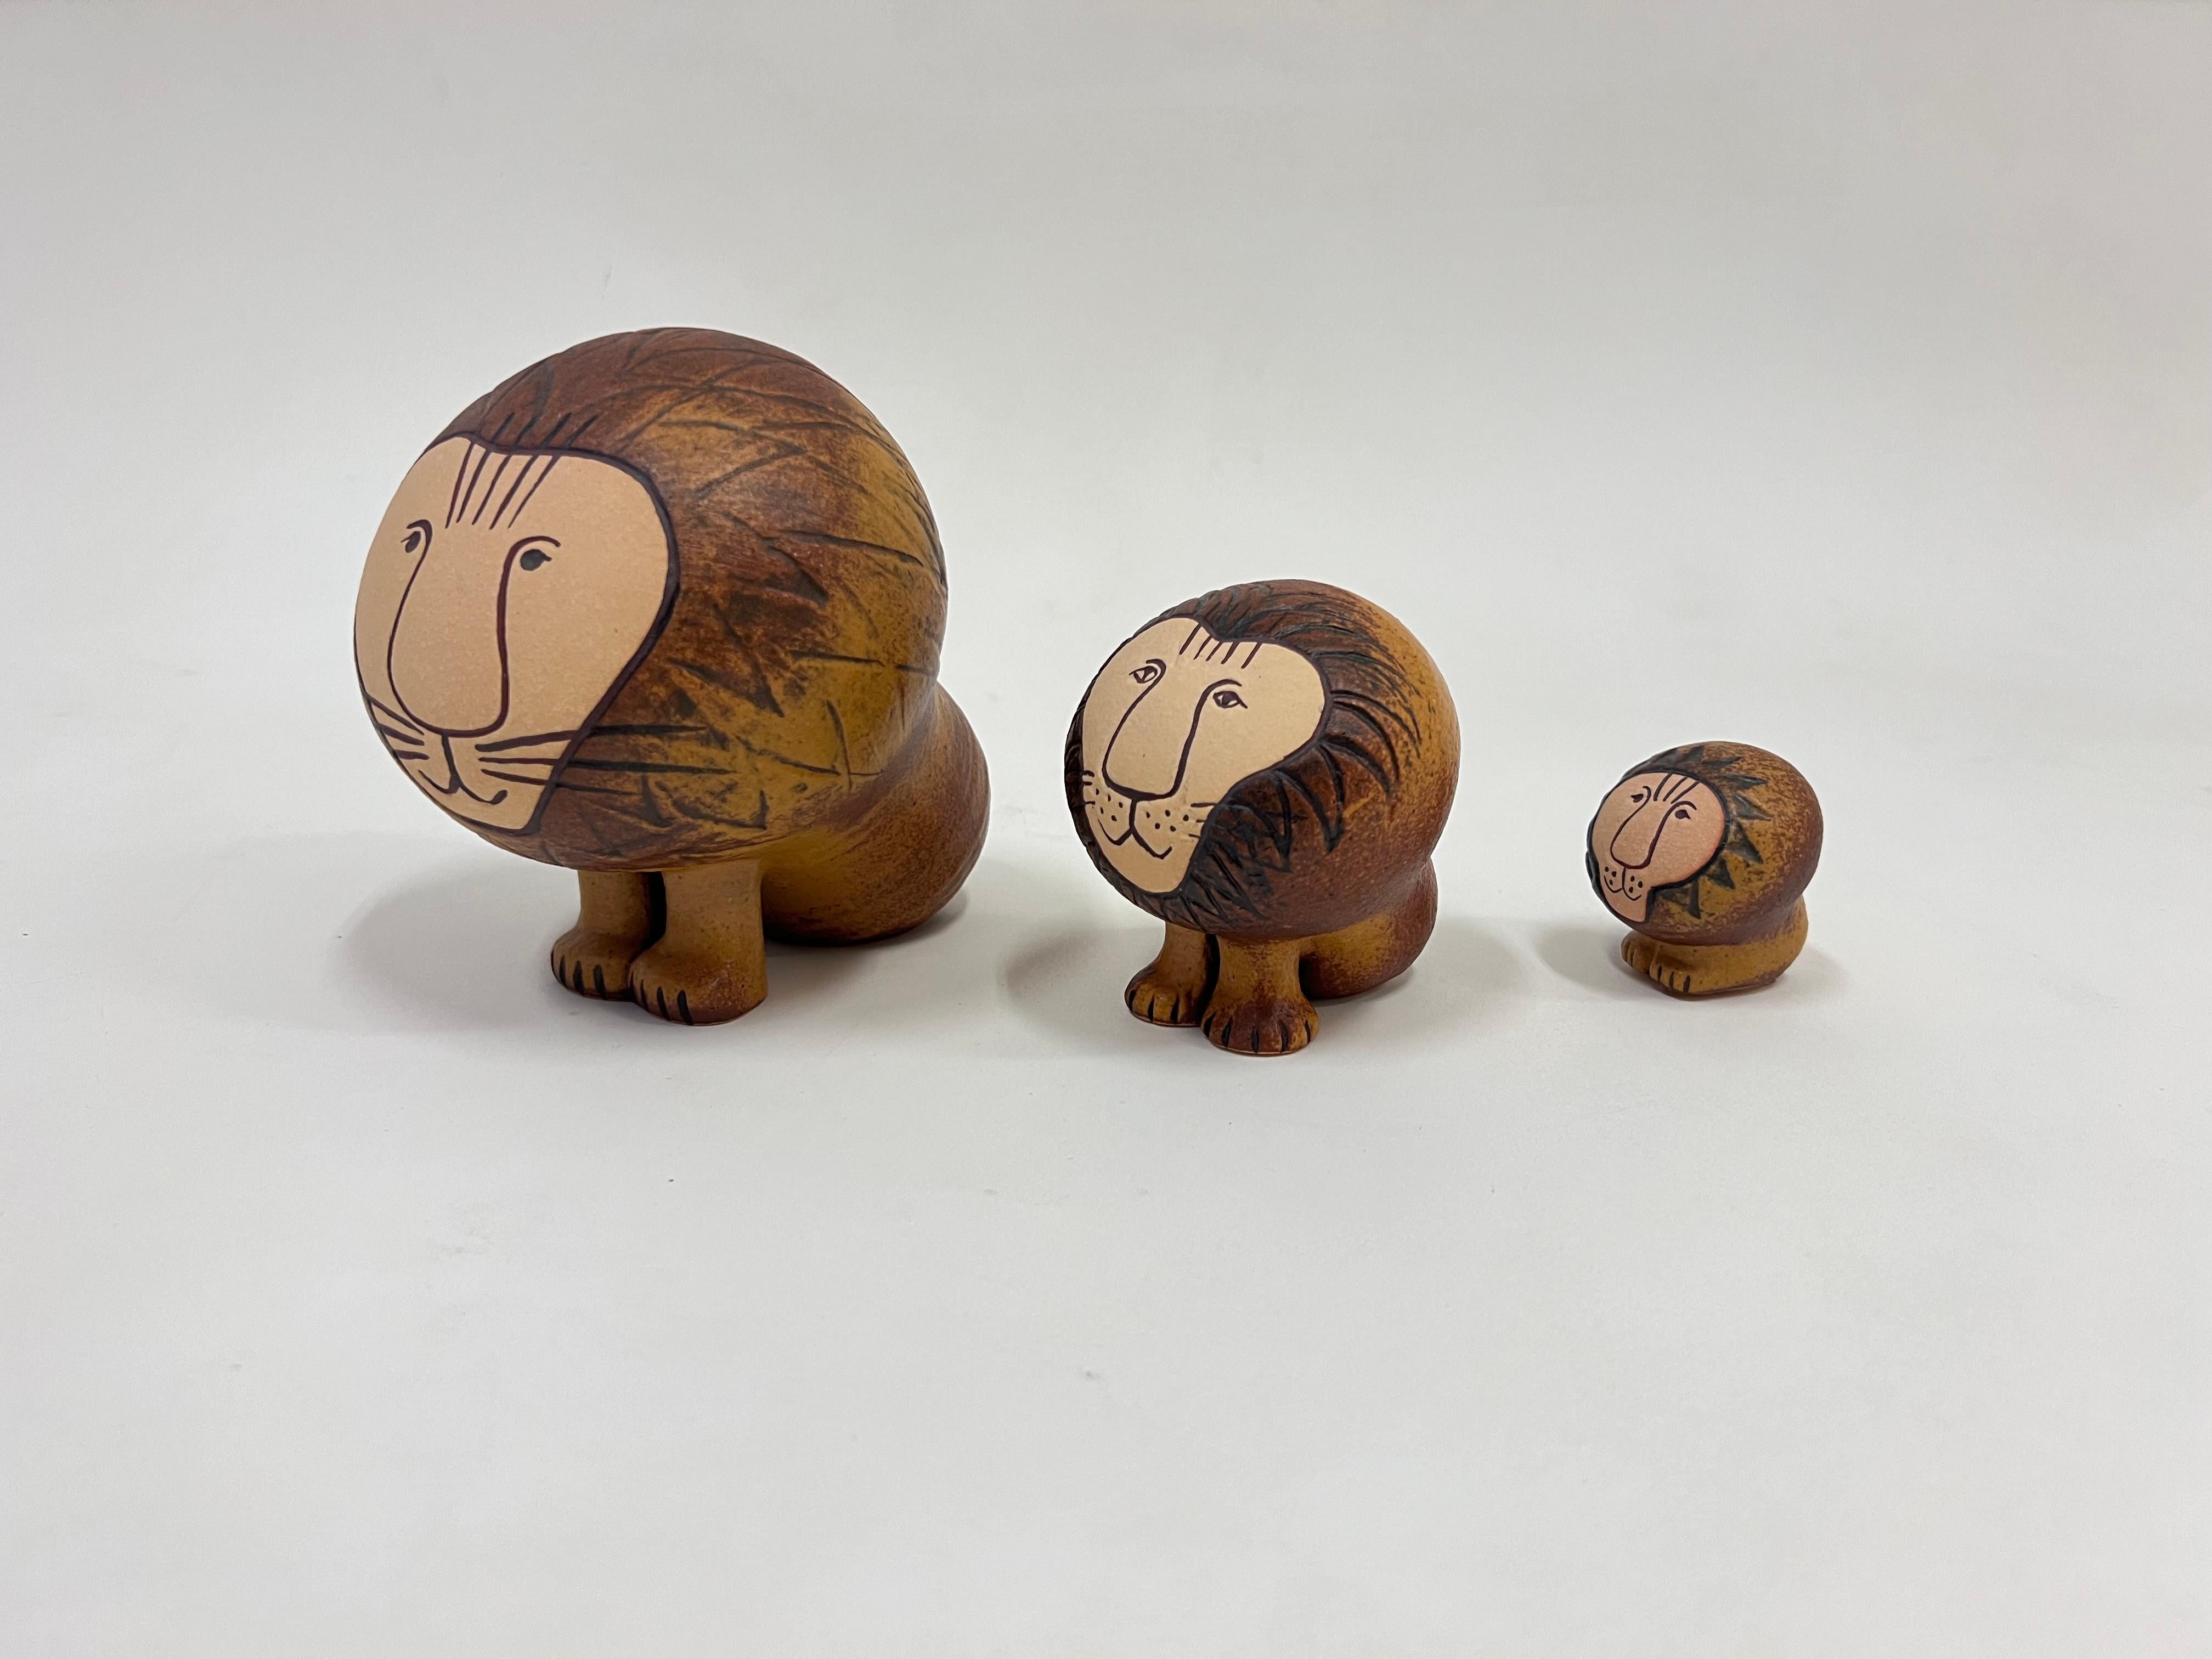 Cute family of three Swedish ceramic lions by renowned ceramicist Lisa Larson. 

Constructed of glazed ceramic. All are marked made in Sweden and Lisa L. 

Dim: 
L-5.5” High, 5” Wide, 7” Deep.
M-4” High, 3.5” Wide, 3.5” Deep. 
S-2.25” High, 2” Wide,